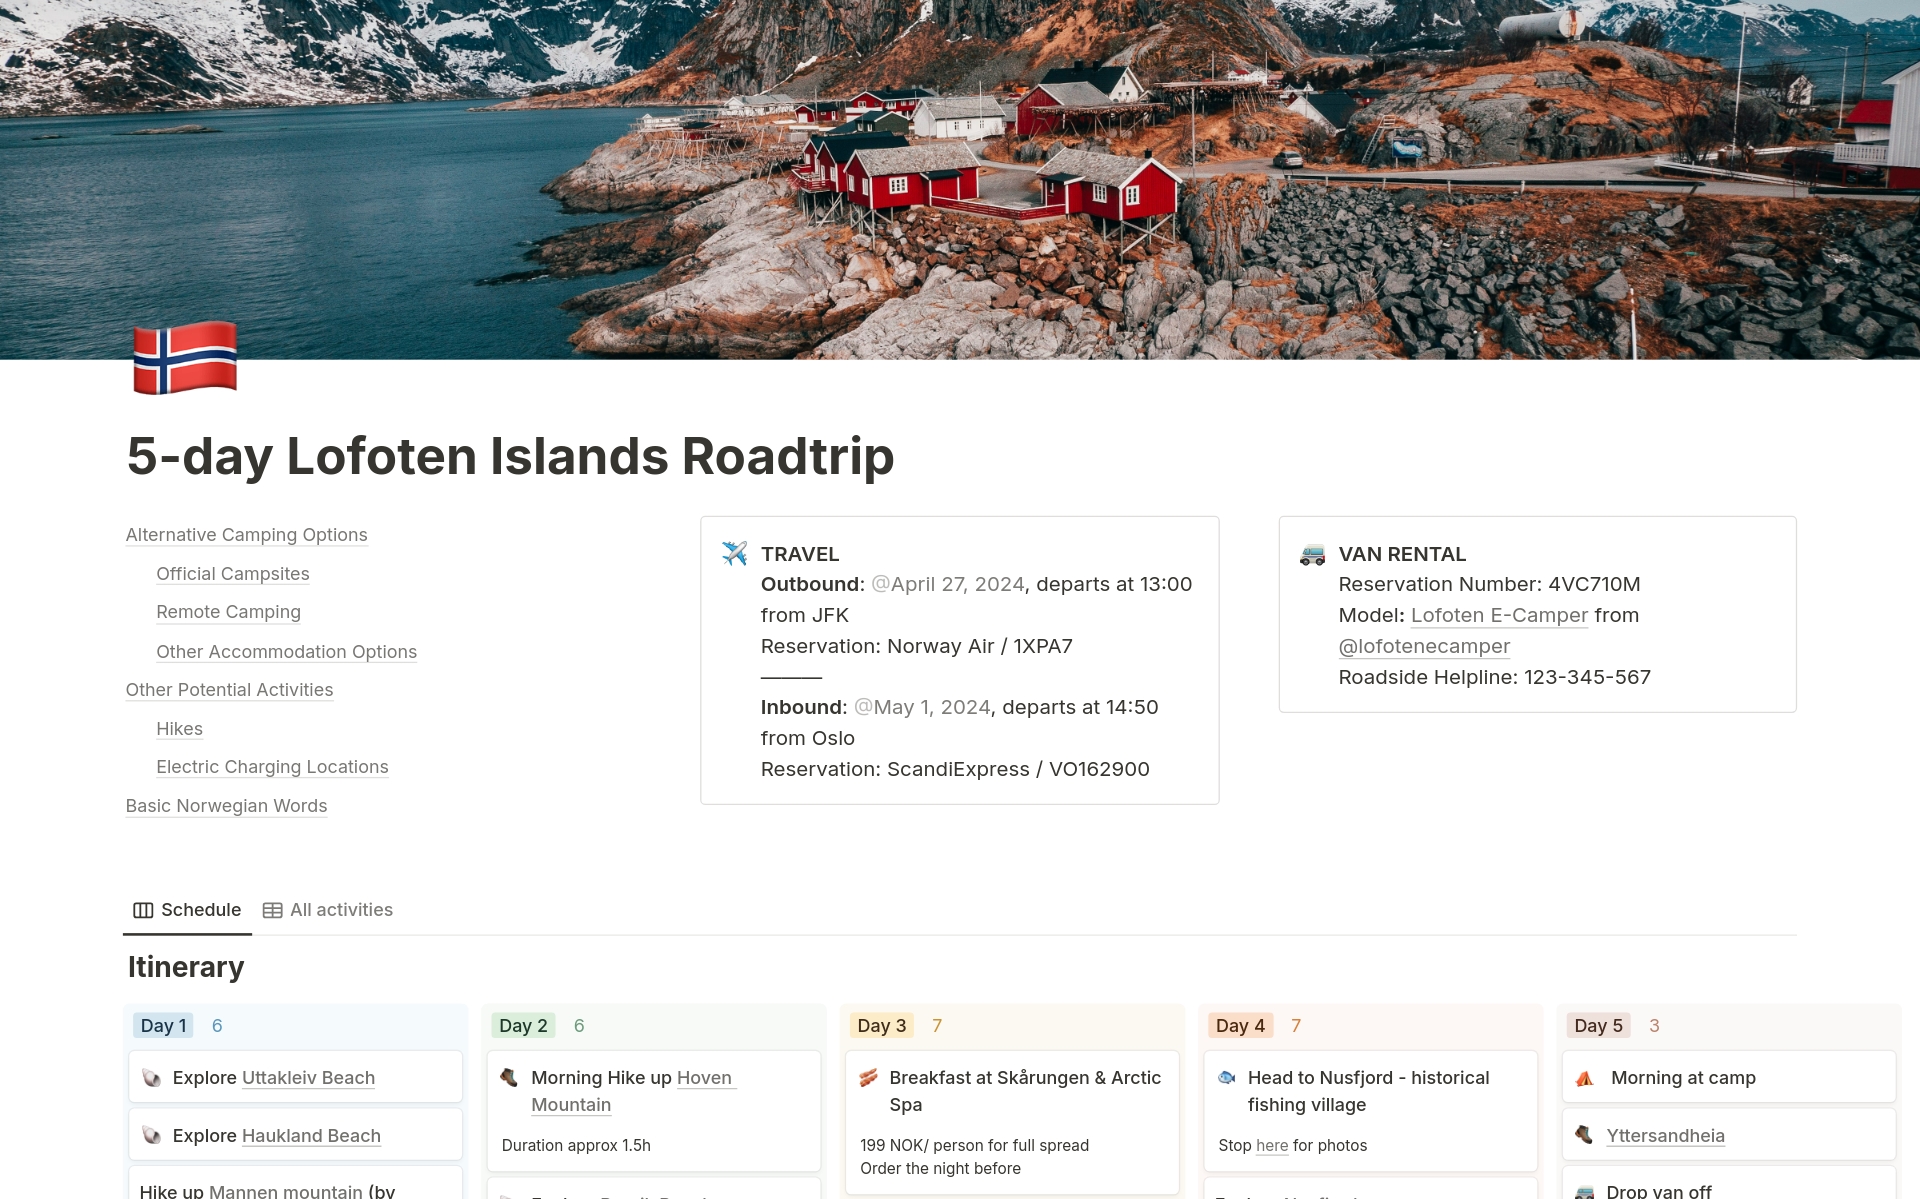 This is the itinerary I followed on my 5-day van trip around Norway's Lofoten Islands, complete with campsites, hikes, activities, charging stations, and more. 